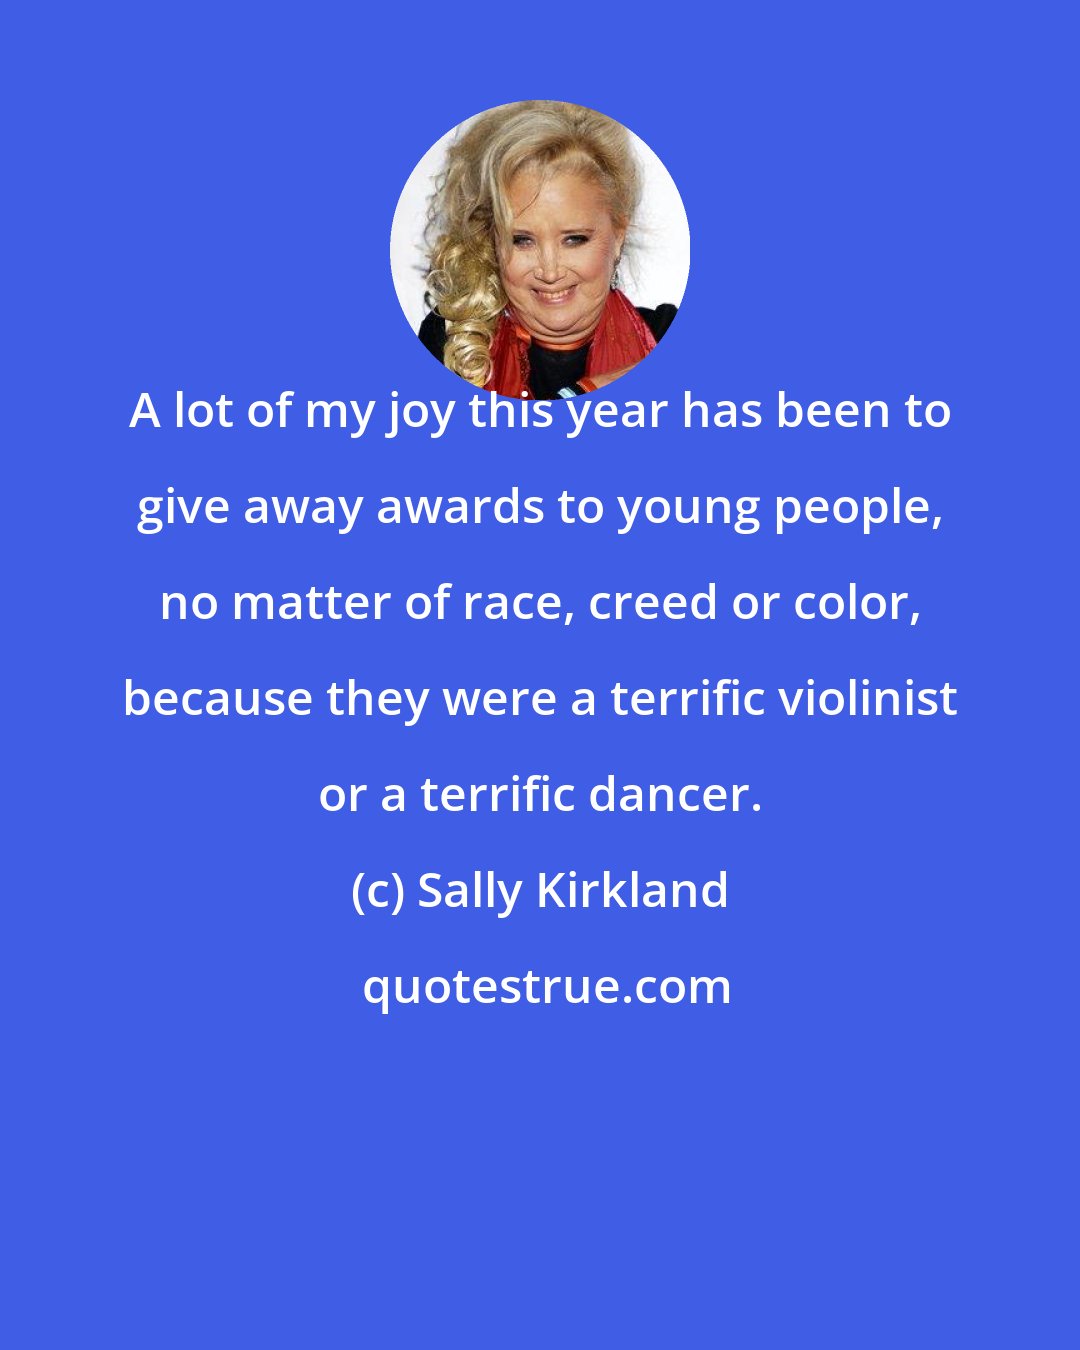 Sally Kirkland: A lot of my joy this year has been to give away awards to young people, no matter of race, creed or color, because they were a terrific violinist or a terrific dancer.